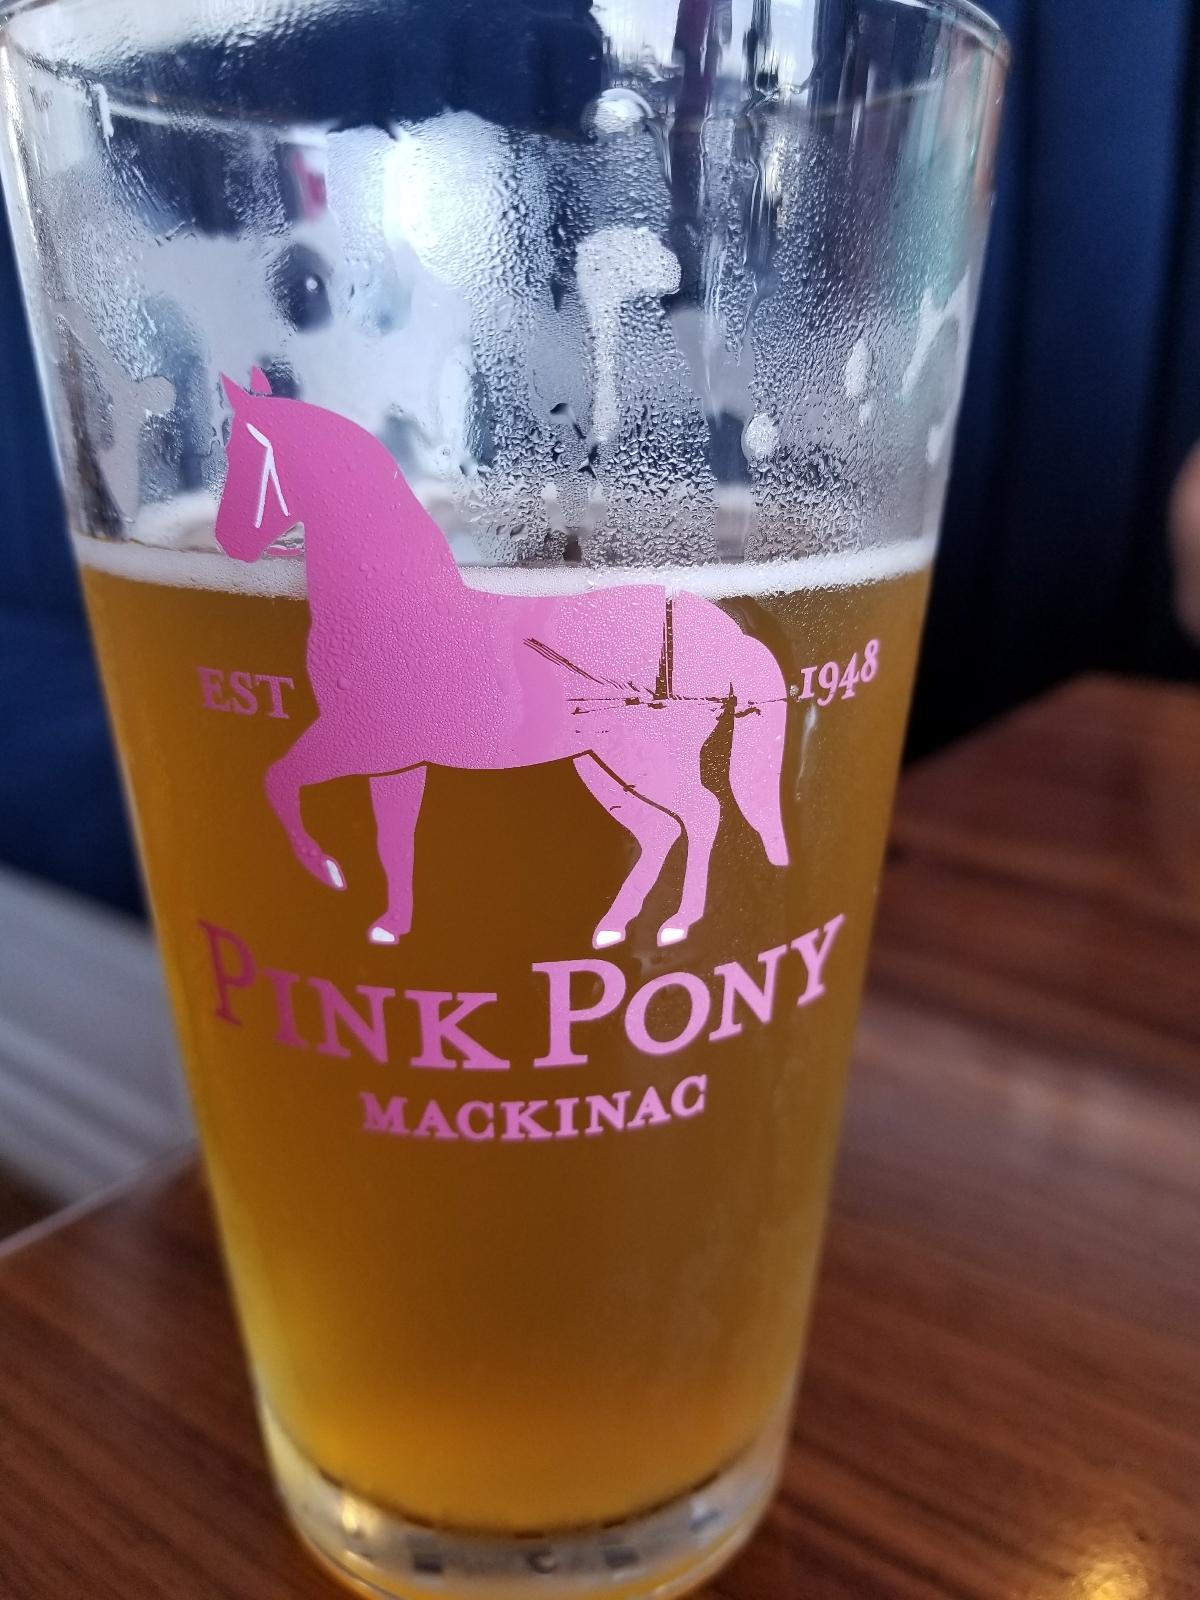 The Pink Pony Ale